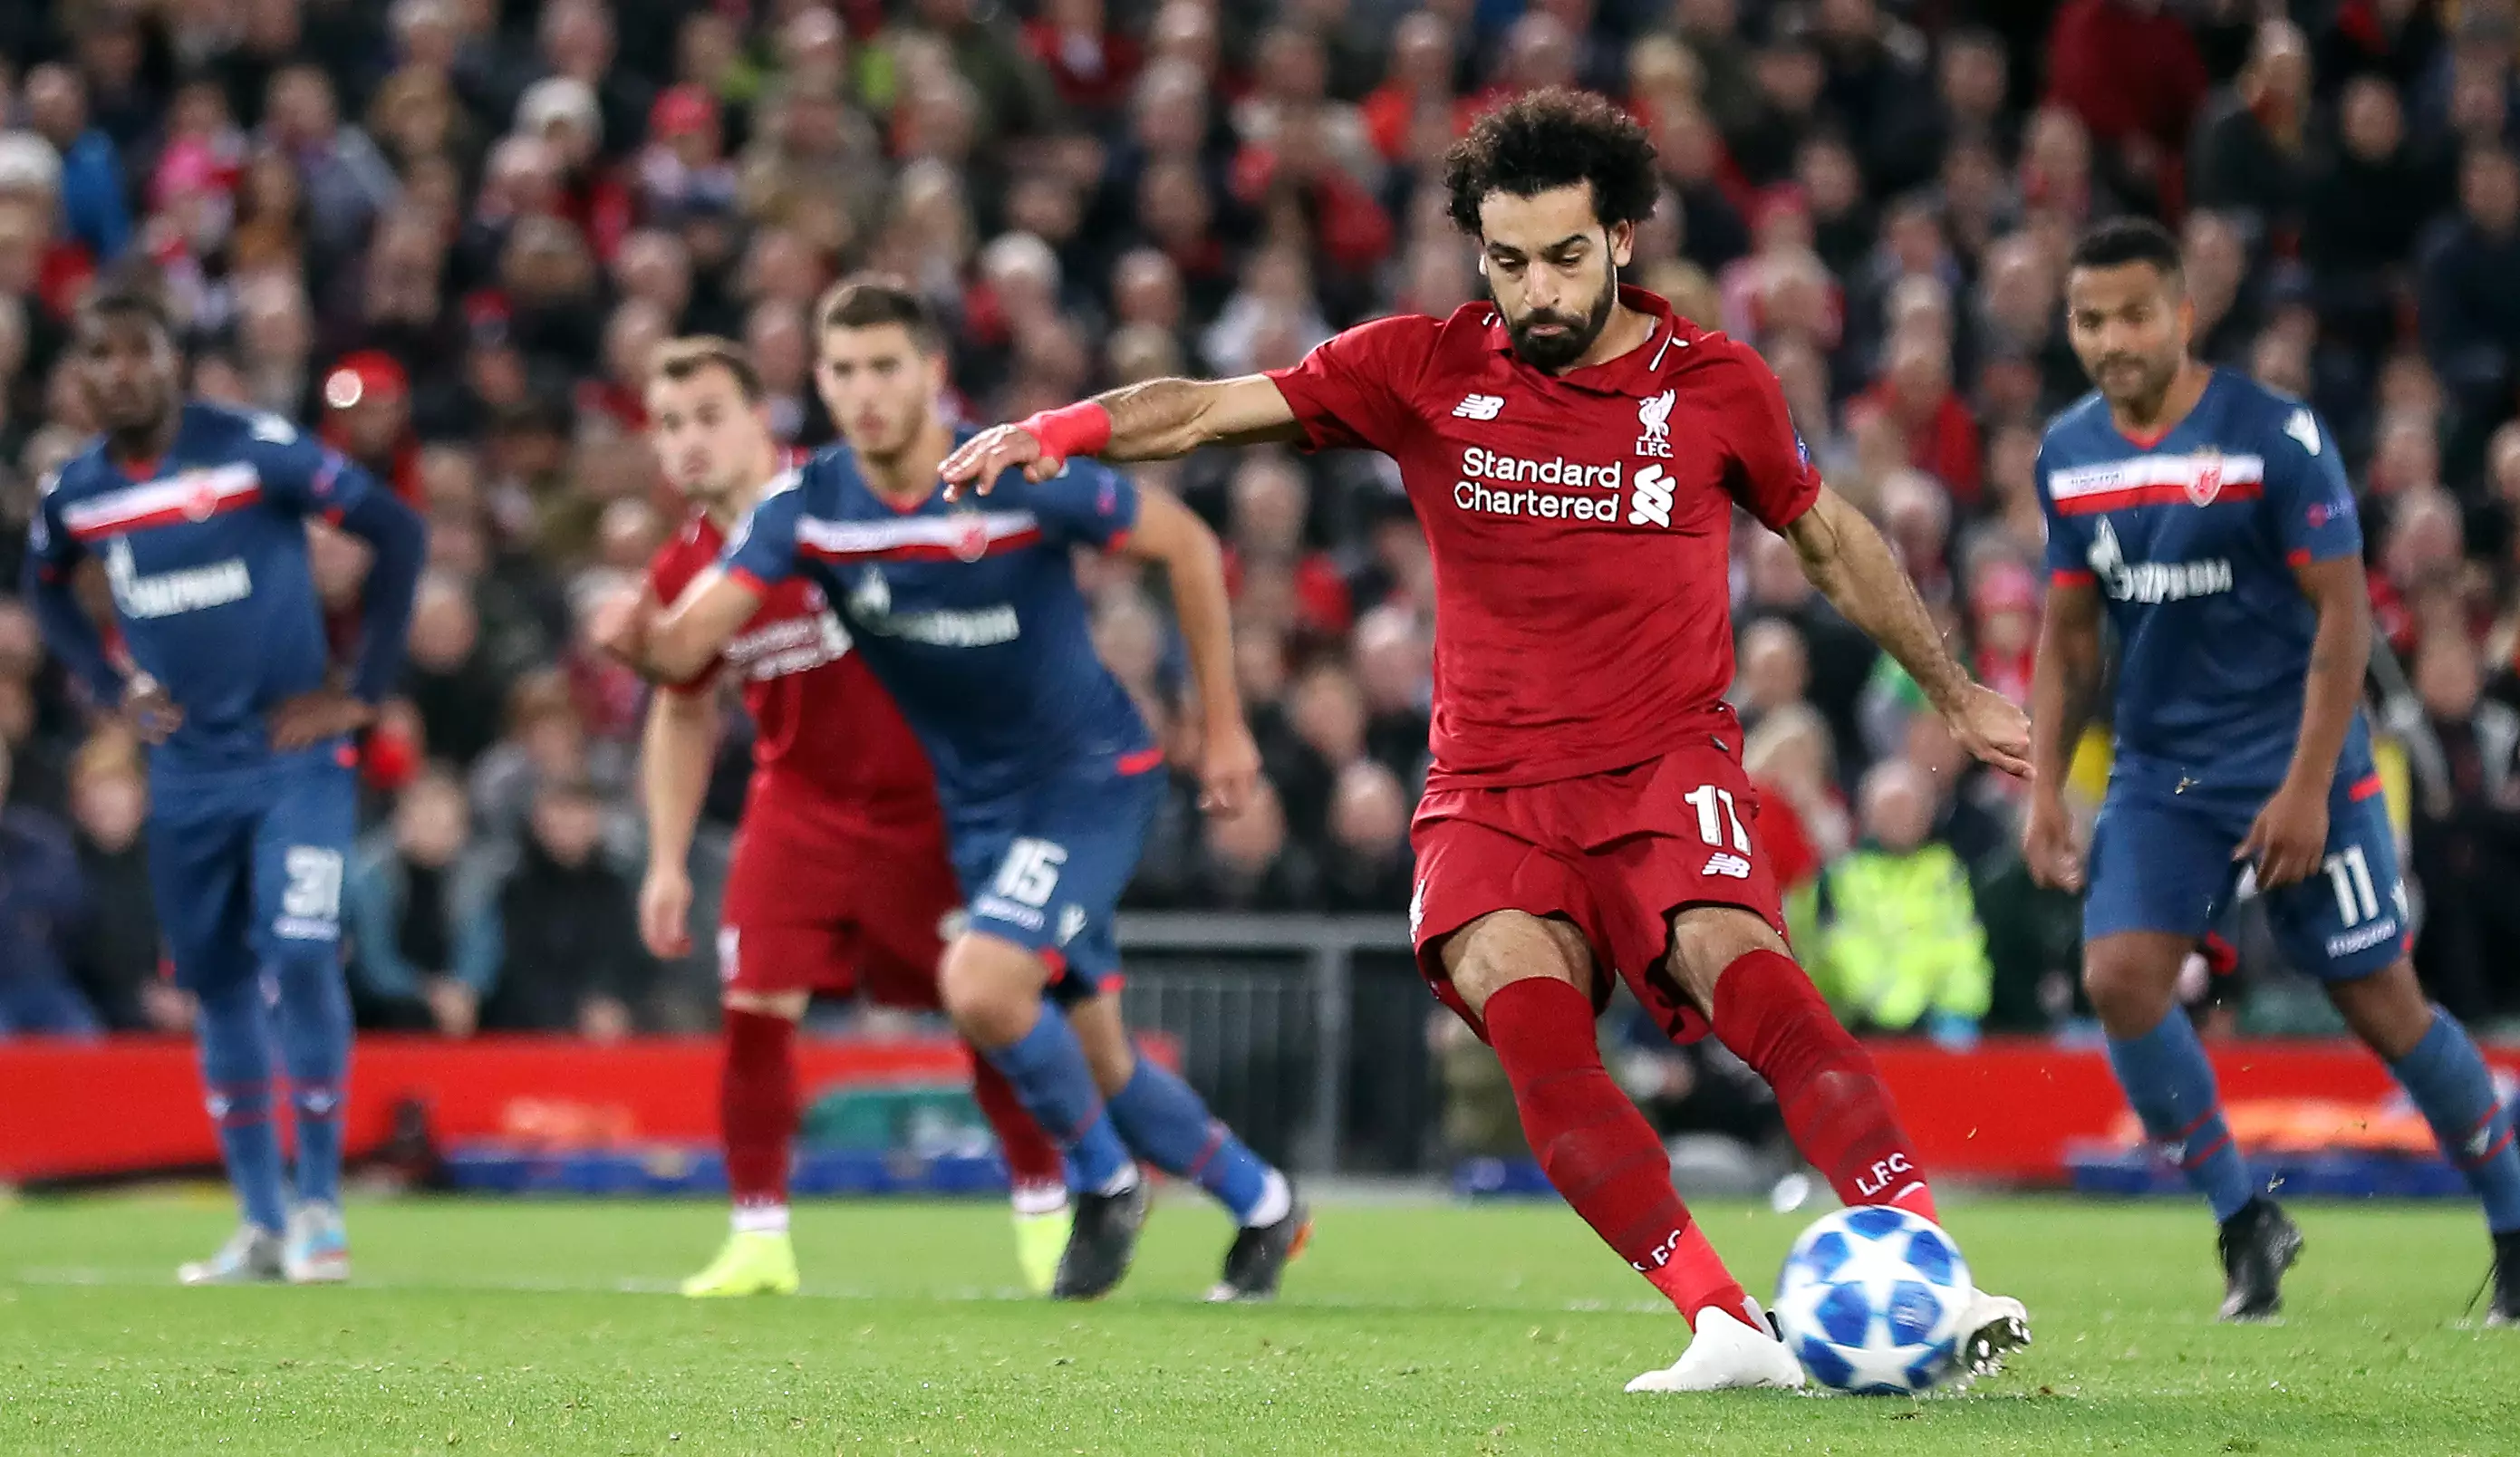 Salah's second came from the penalty spot. Image: PA Images